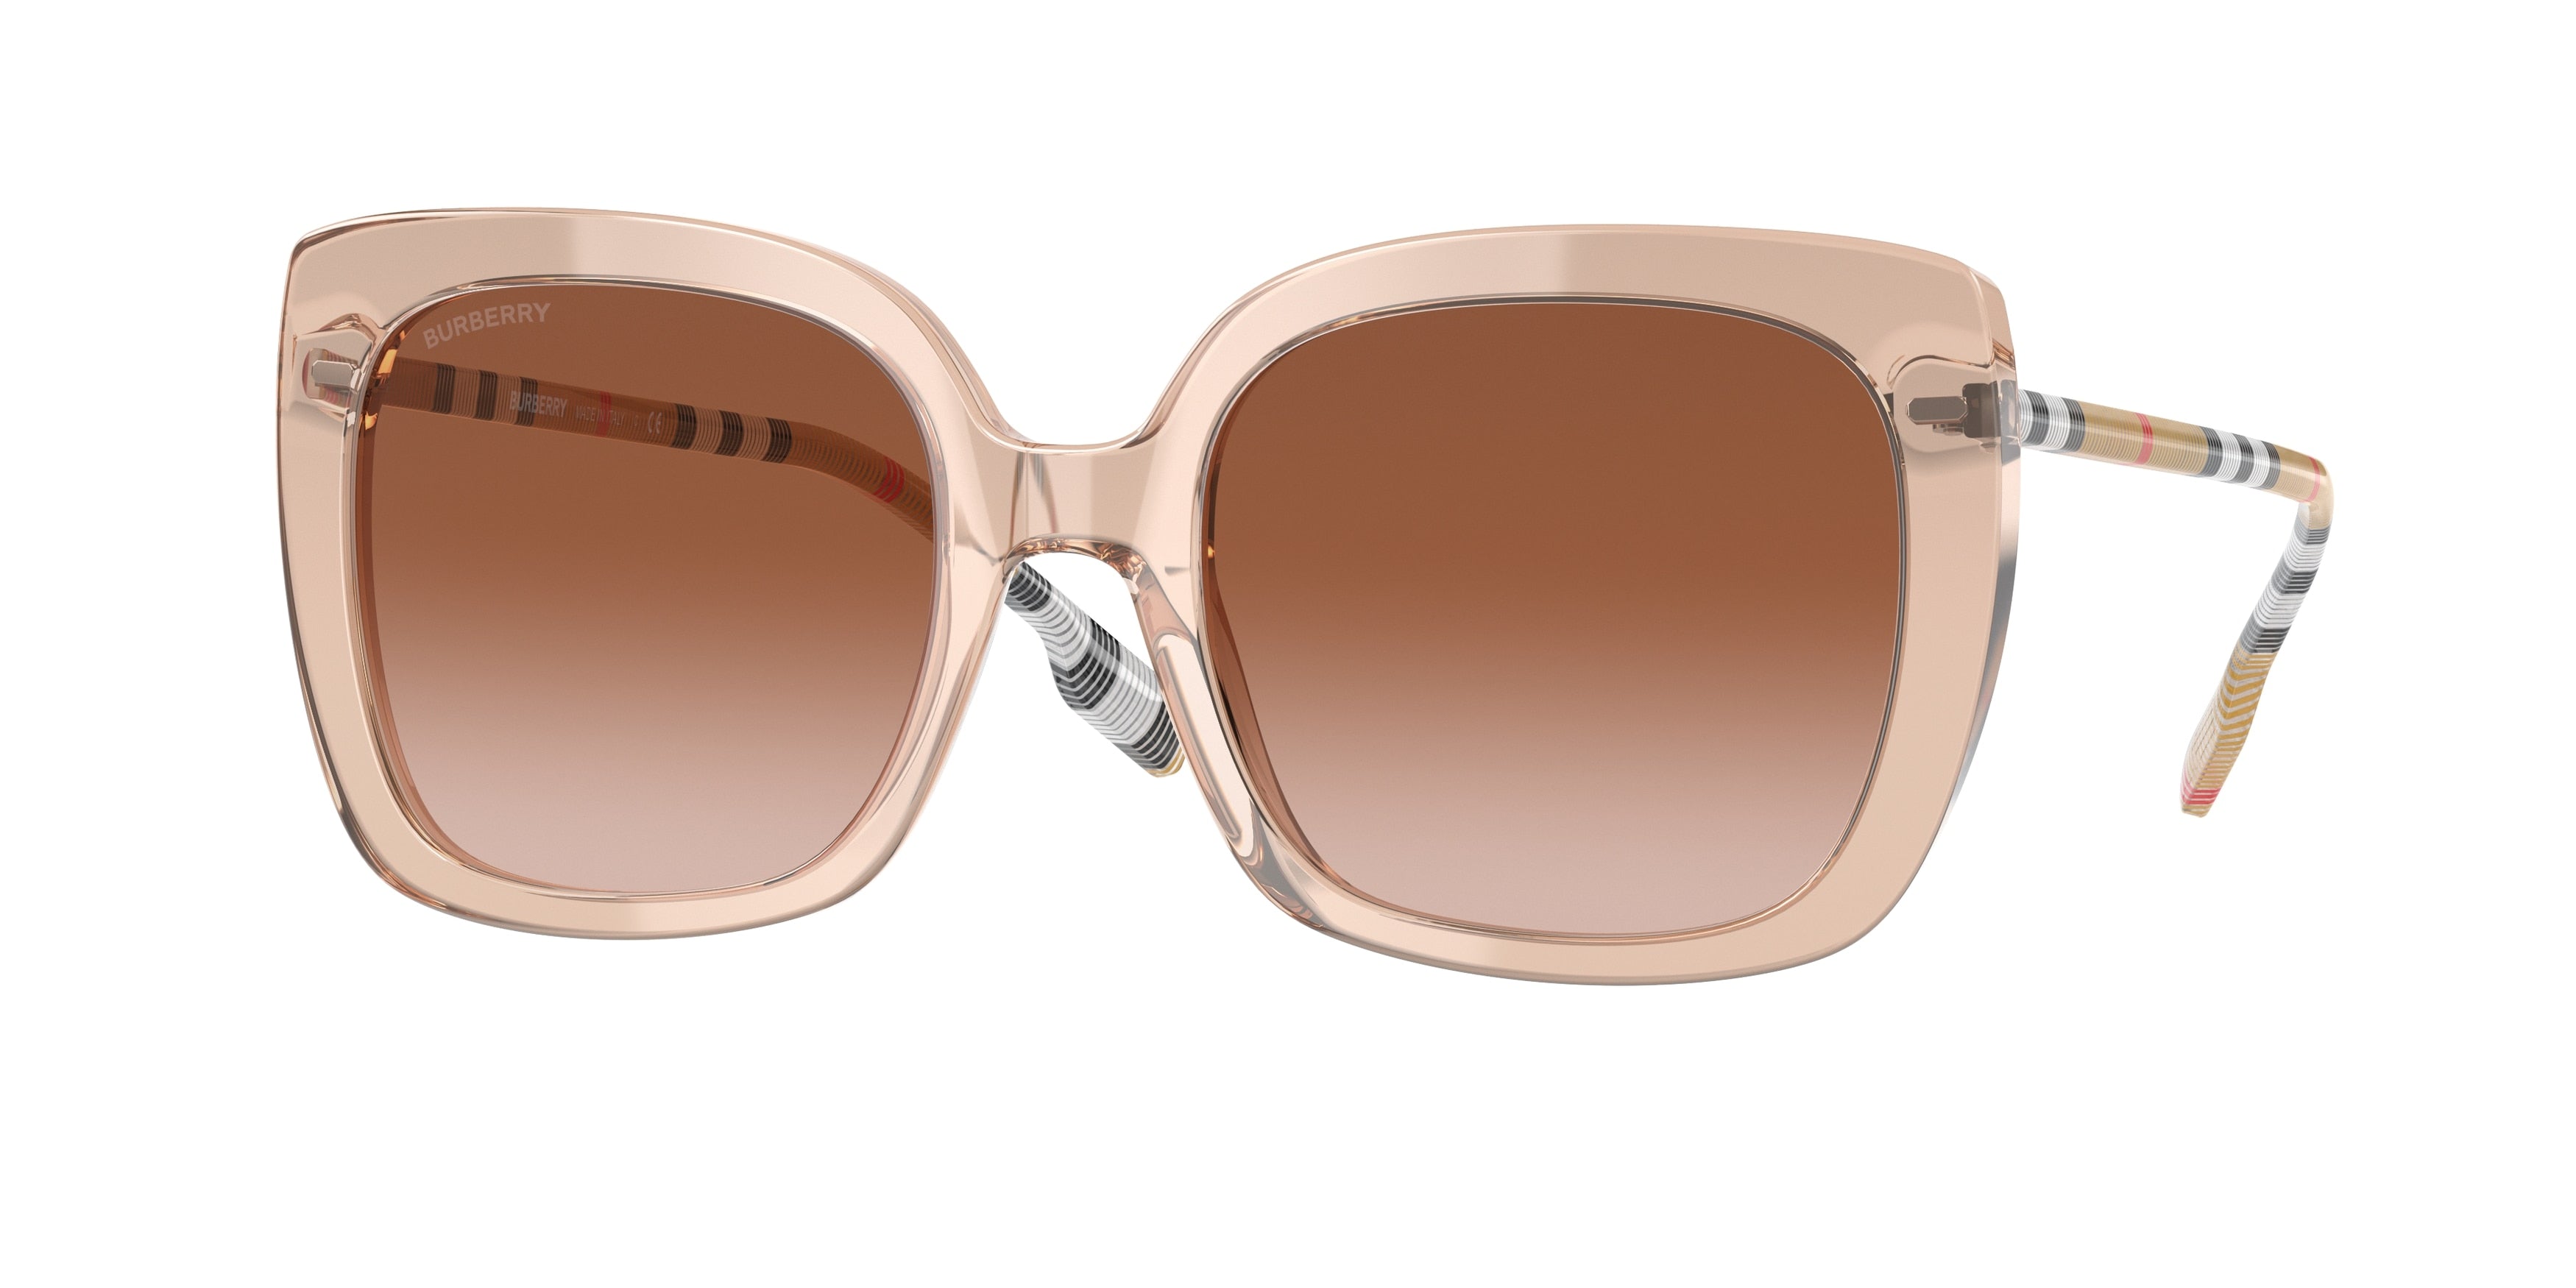 Burberry CAROLL BE4323 Square Sunglasses  400613-Peach 54-140-20 - Color Map Pink